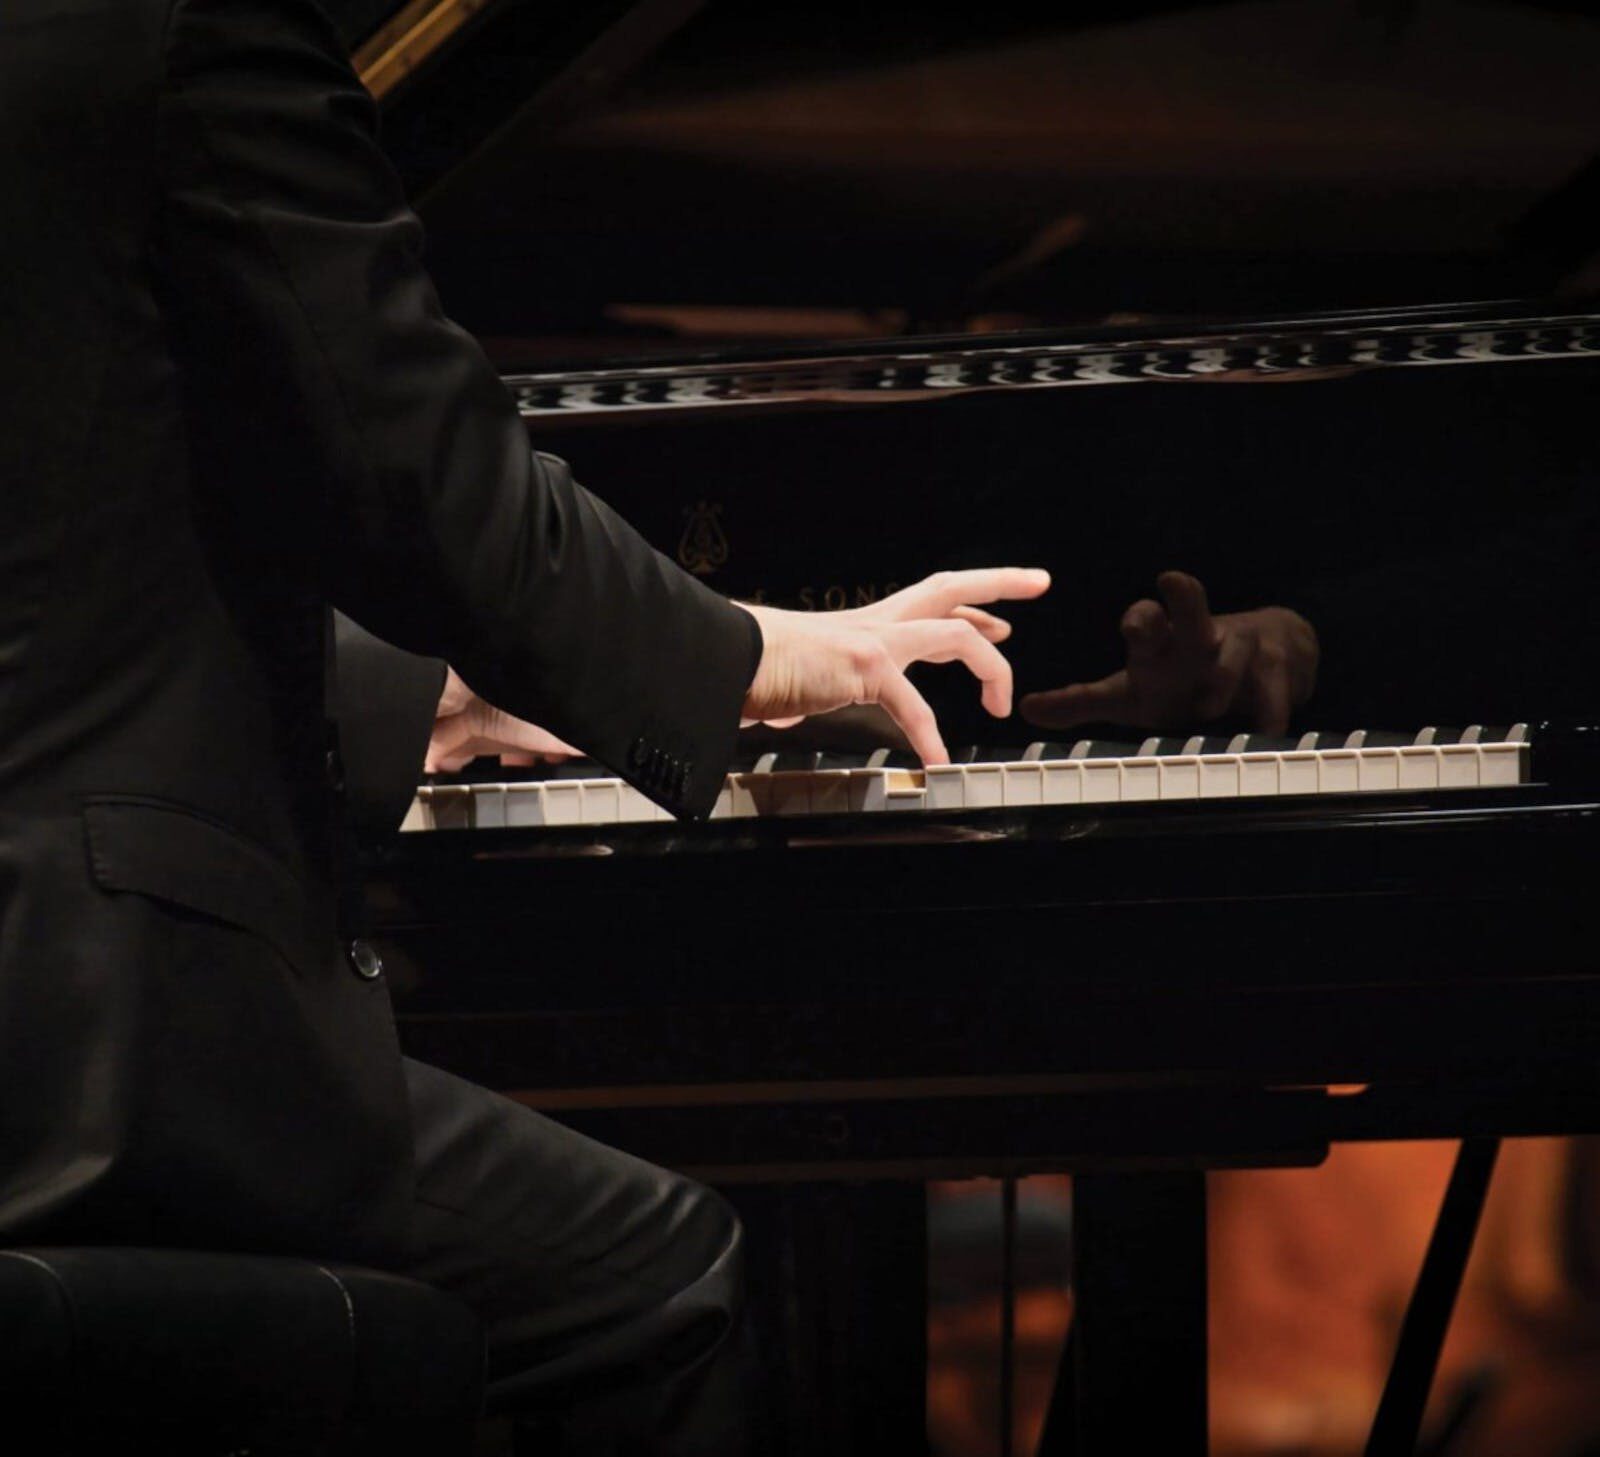 A musician in a black suit, whose back is facing the camera, sitting at a Steinway grand piano.